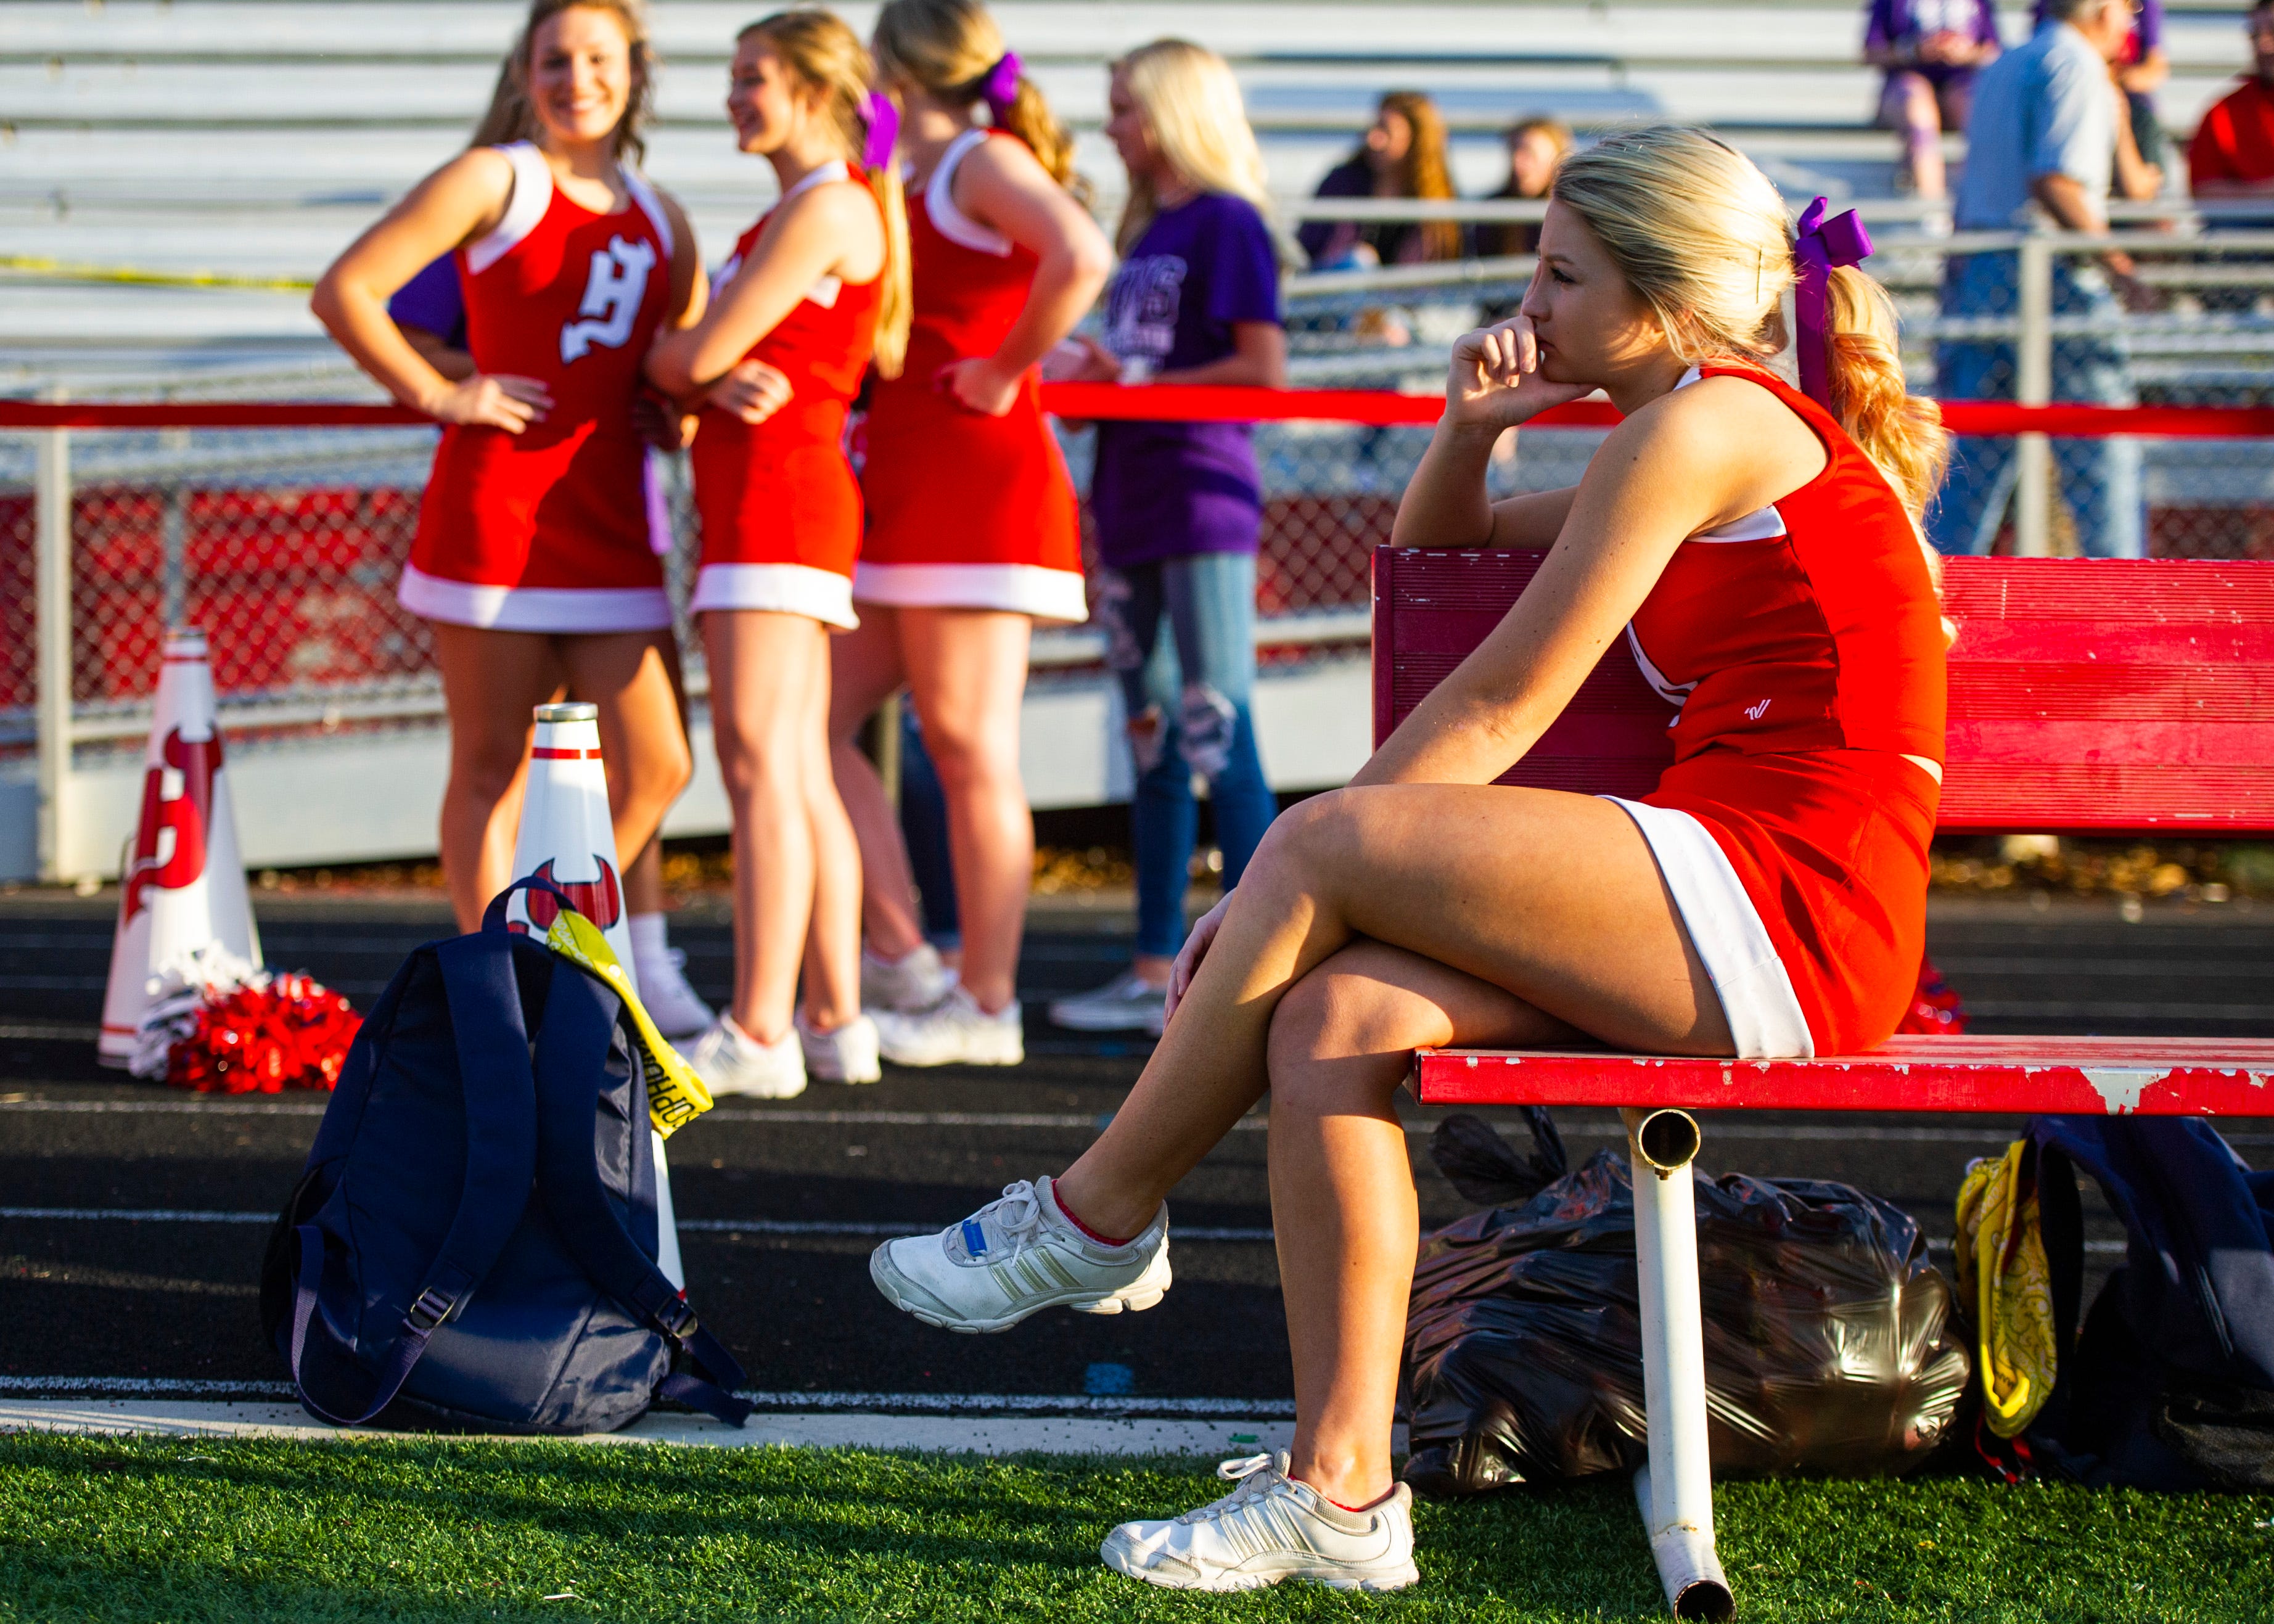 A Halls cheerleader before the Halls and Central high school football game on Friday, October 4, 2019 at Halls High School.